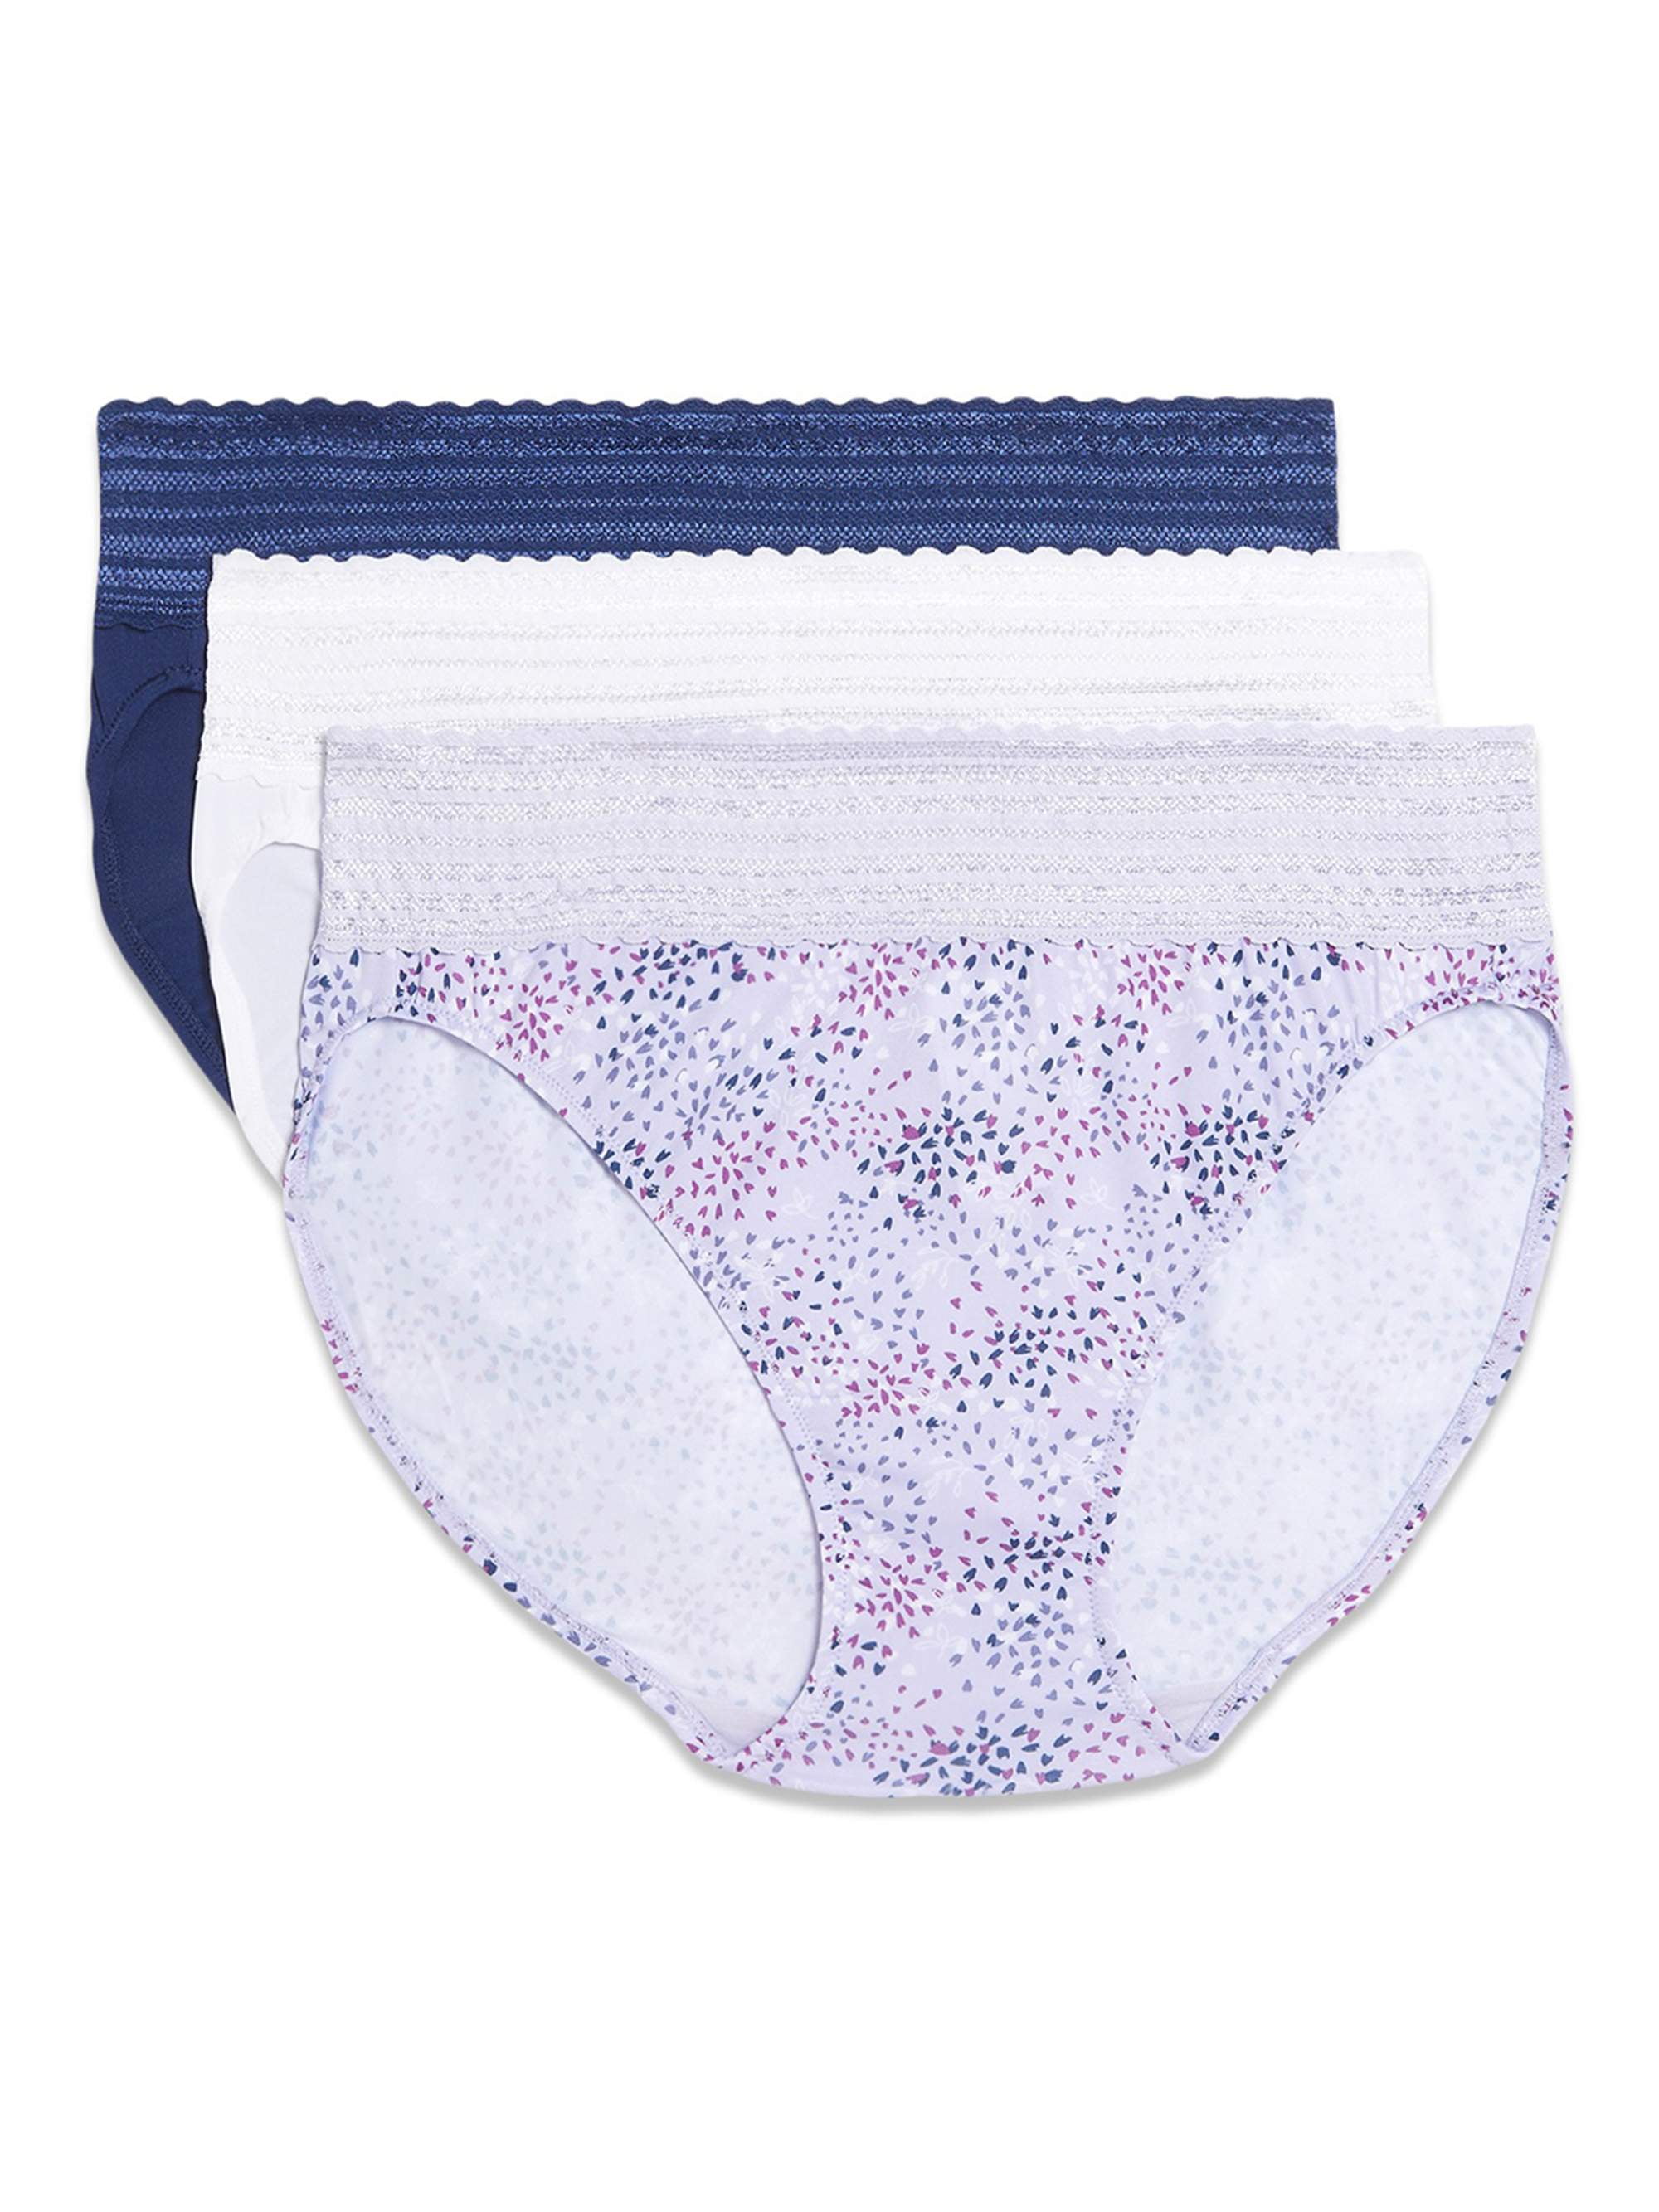 Warners® Blissful Benefits Dig-Free Comfort Waistband with Lace Microfiber  Hi-Cut 3-Pack 5109W